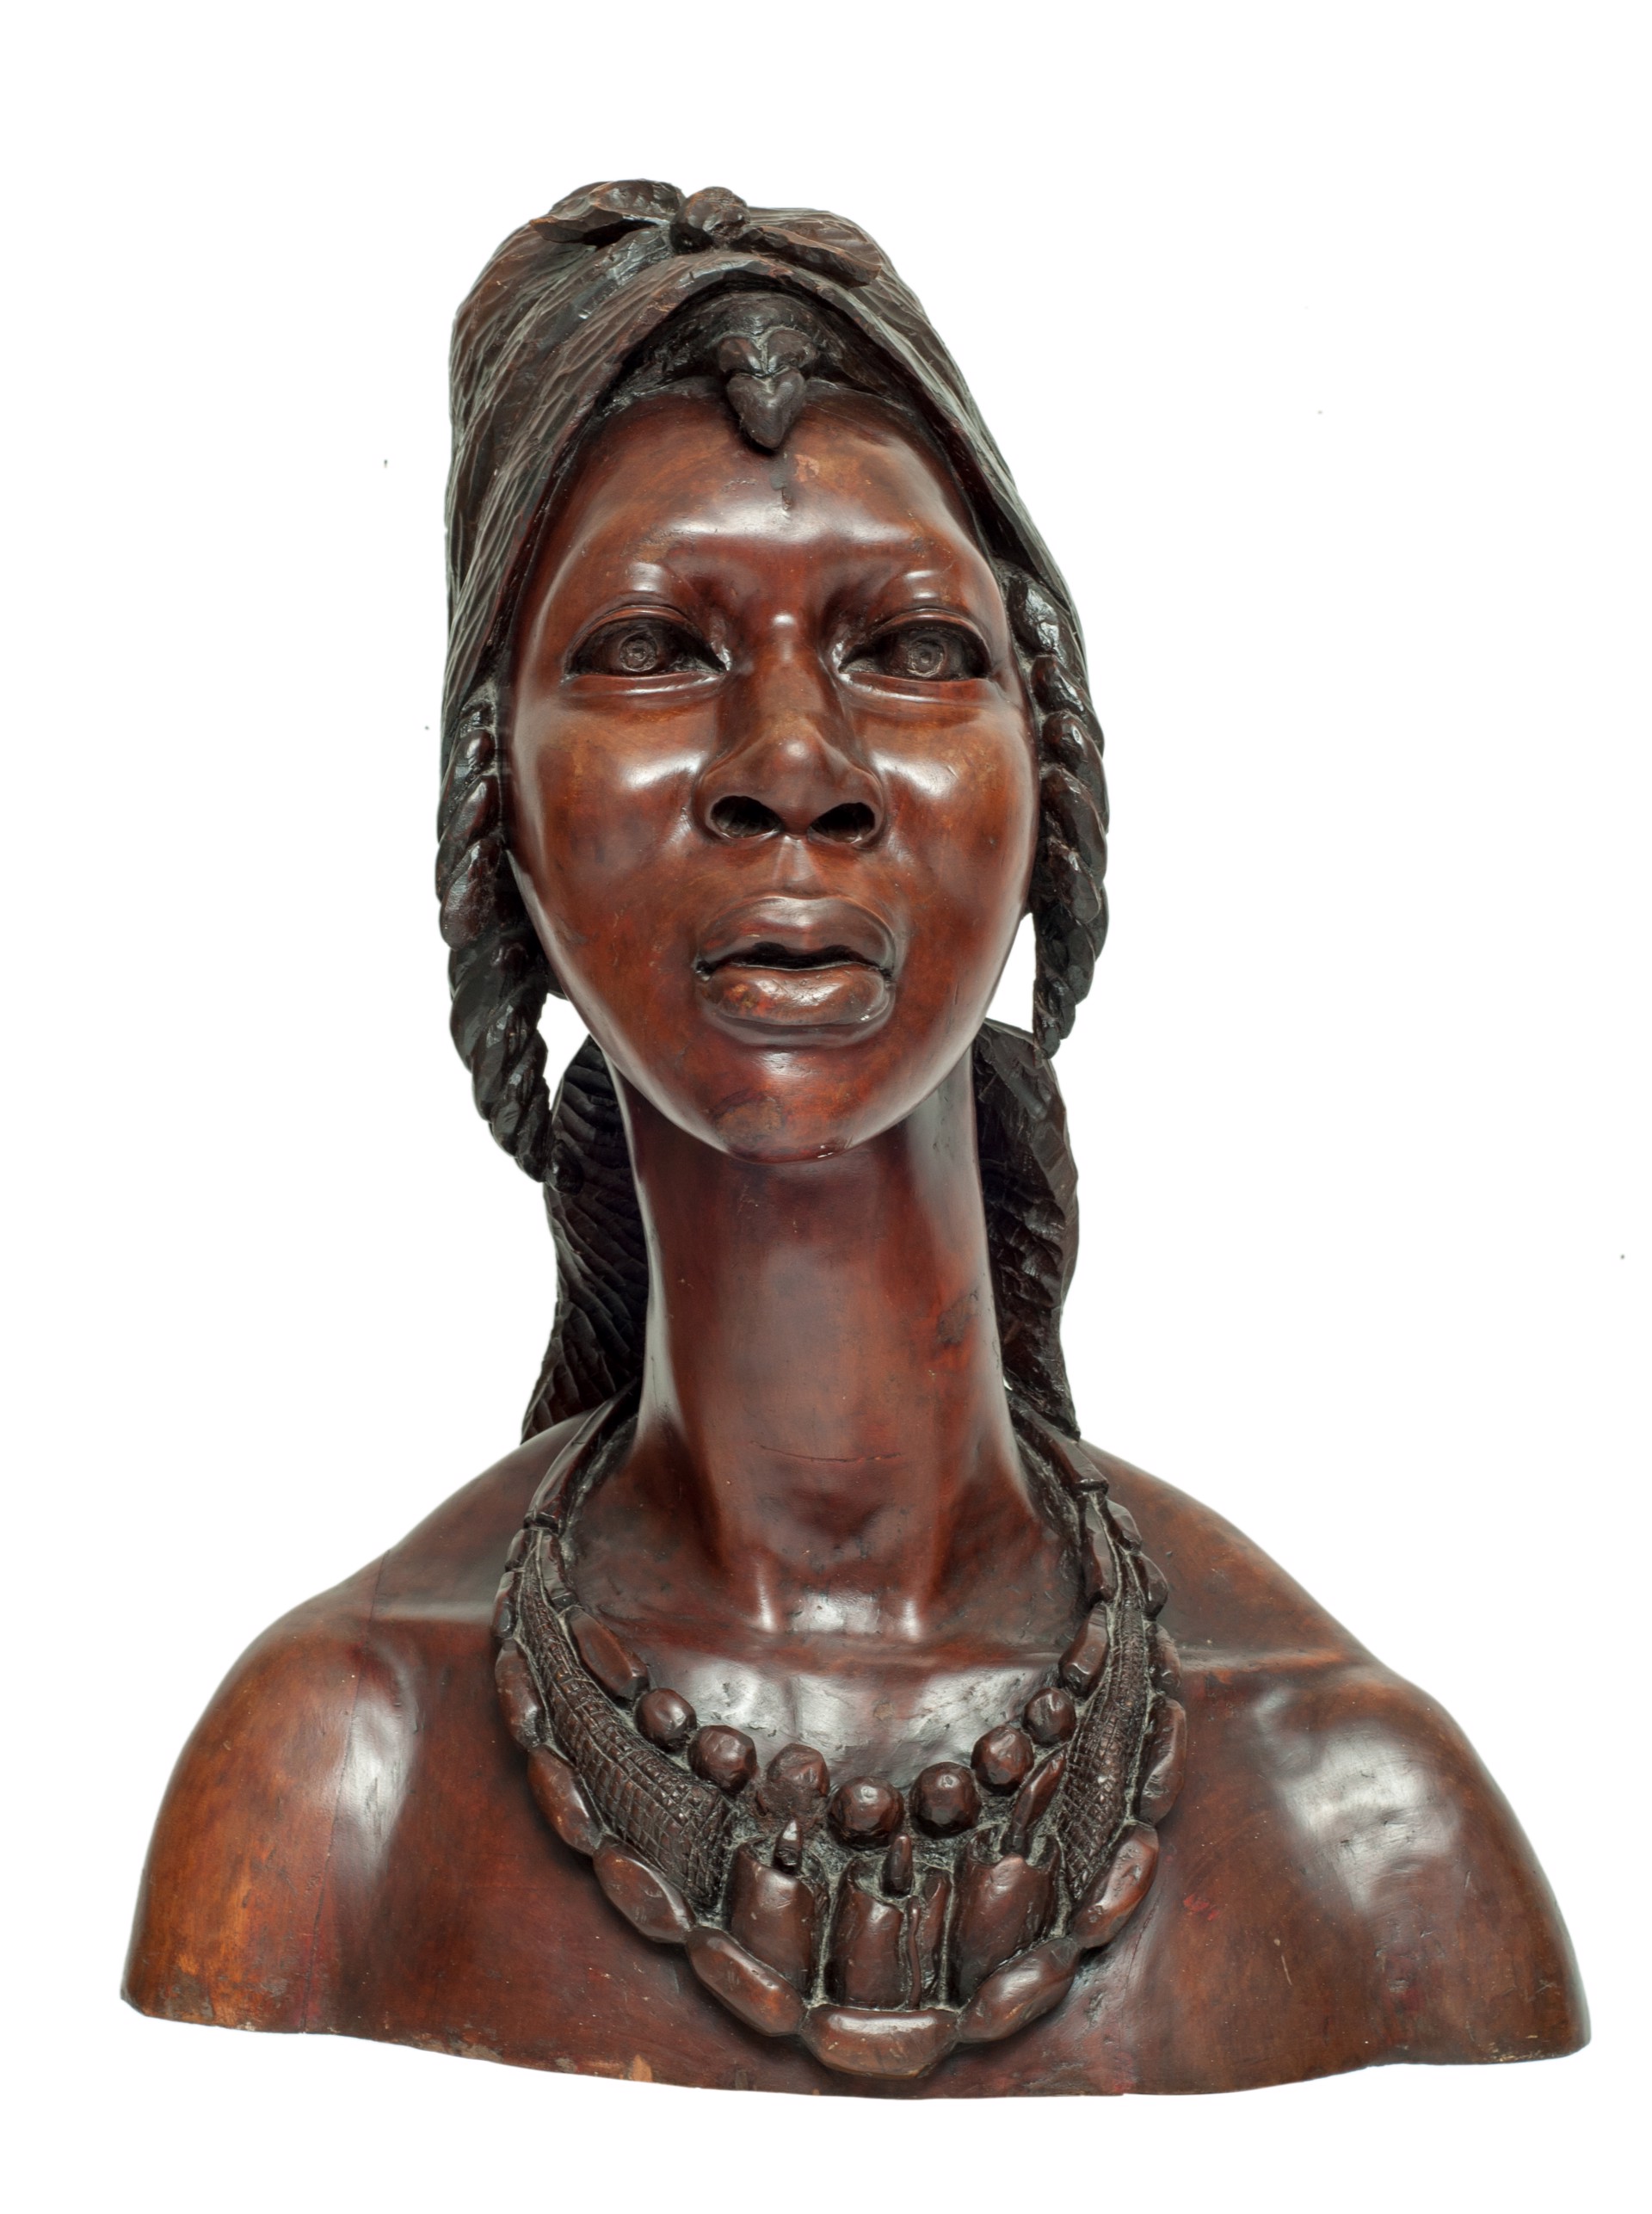 Bust Female Figure With Necklace #5-1-11GSN by Joseph & Jean-Baptiste Maurice (Haitian, 1932-Joseph died in 1977)